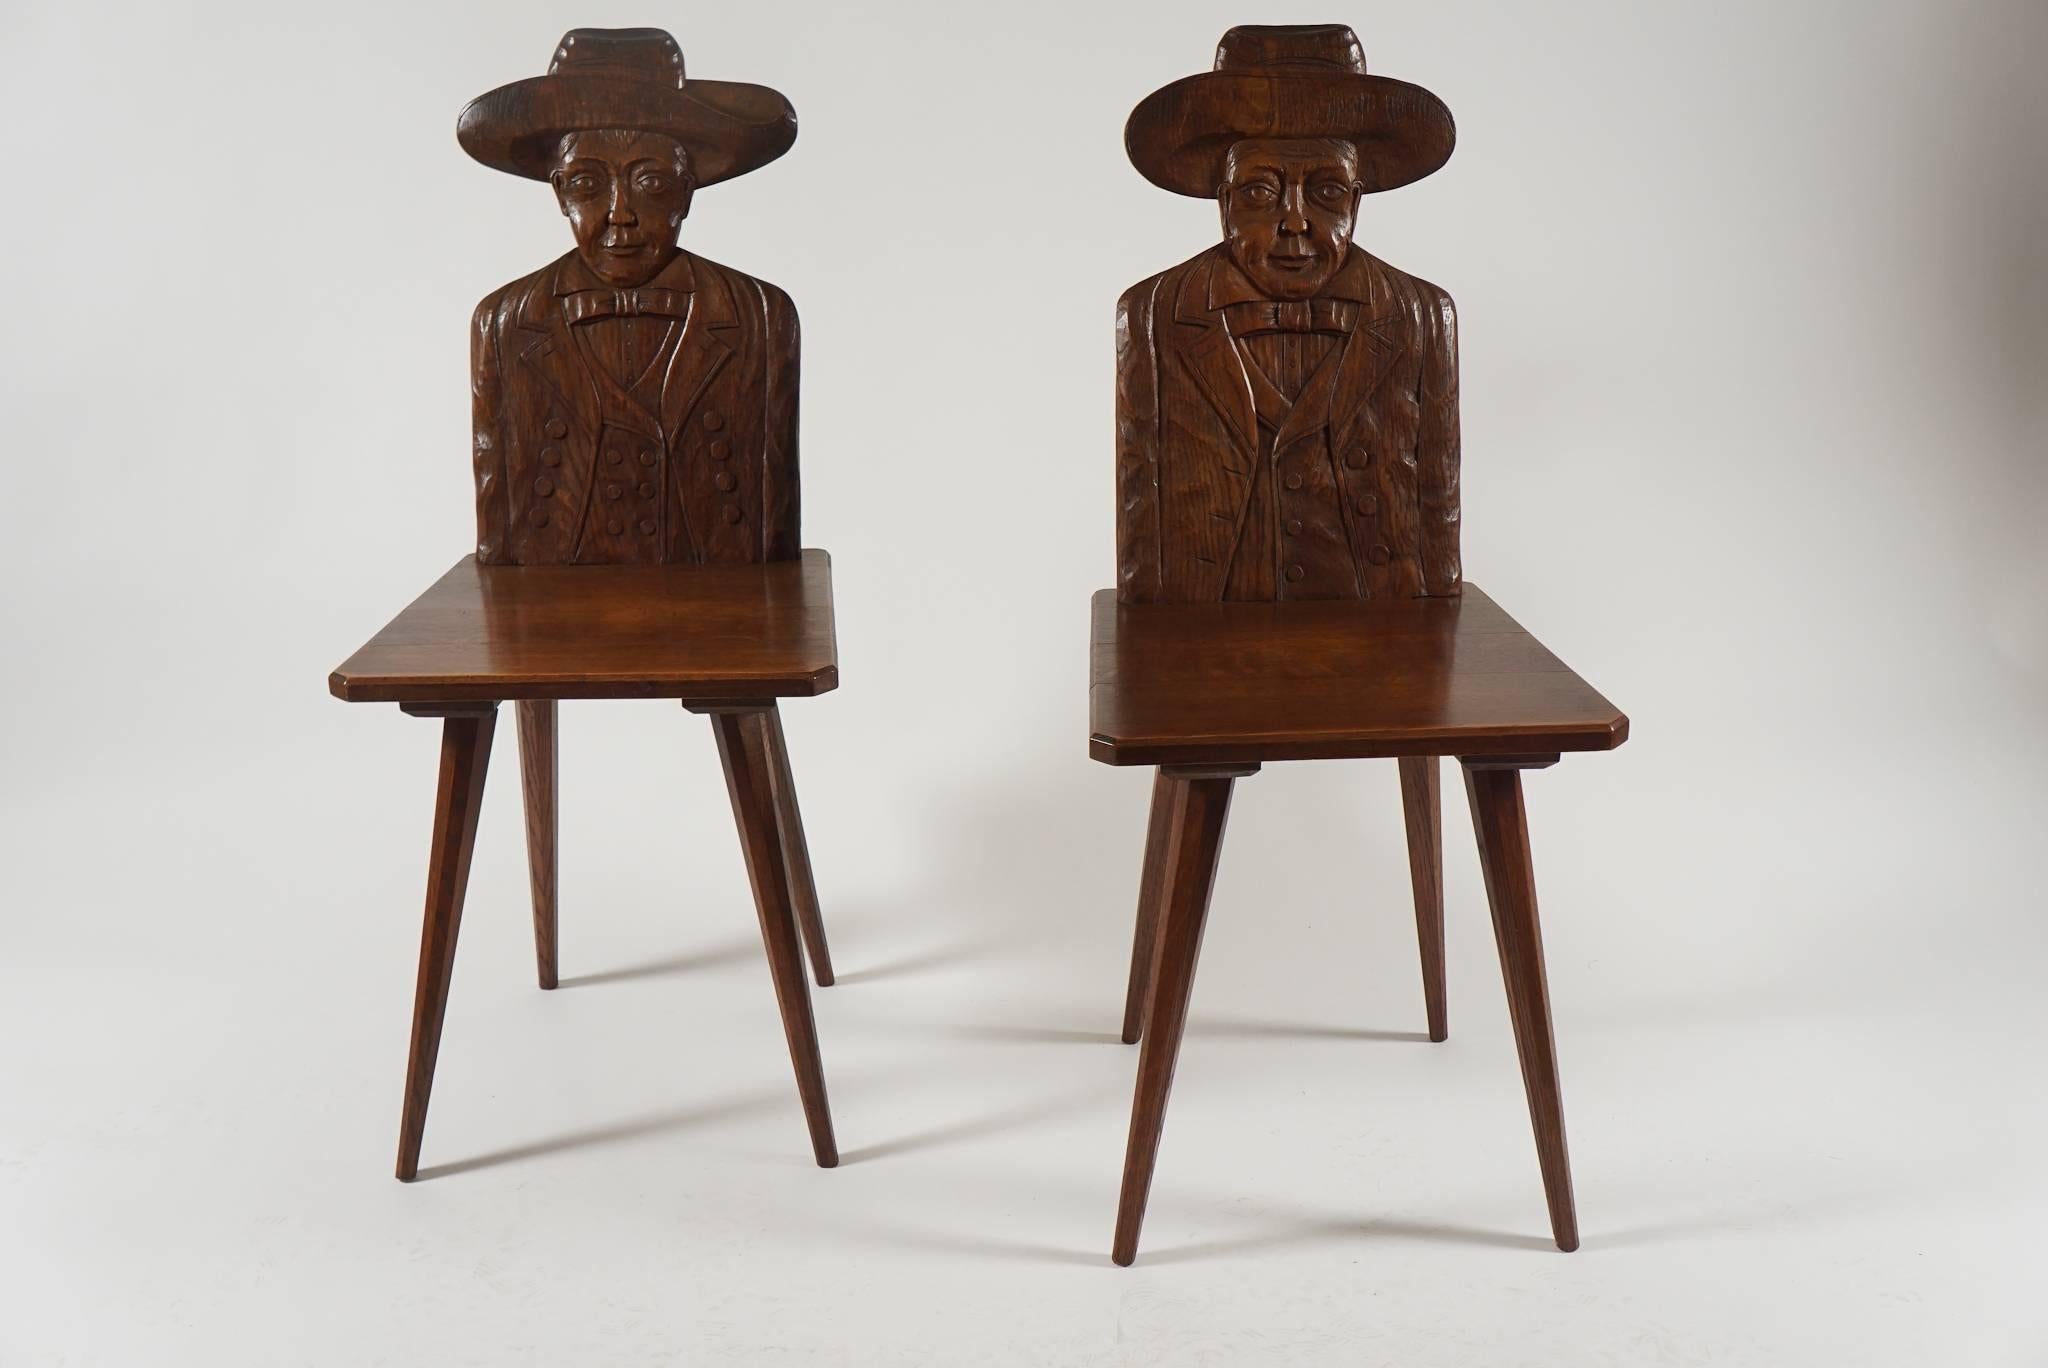 Chestnut Exceptional Pair of Early French Modernist 'Cowboy' Hall Seats, circa 1920